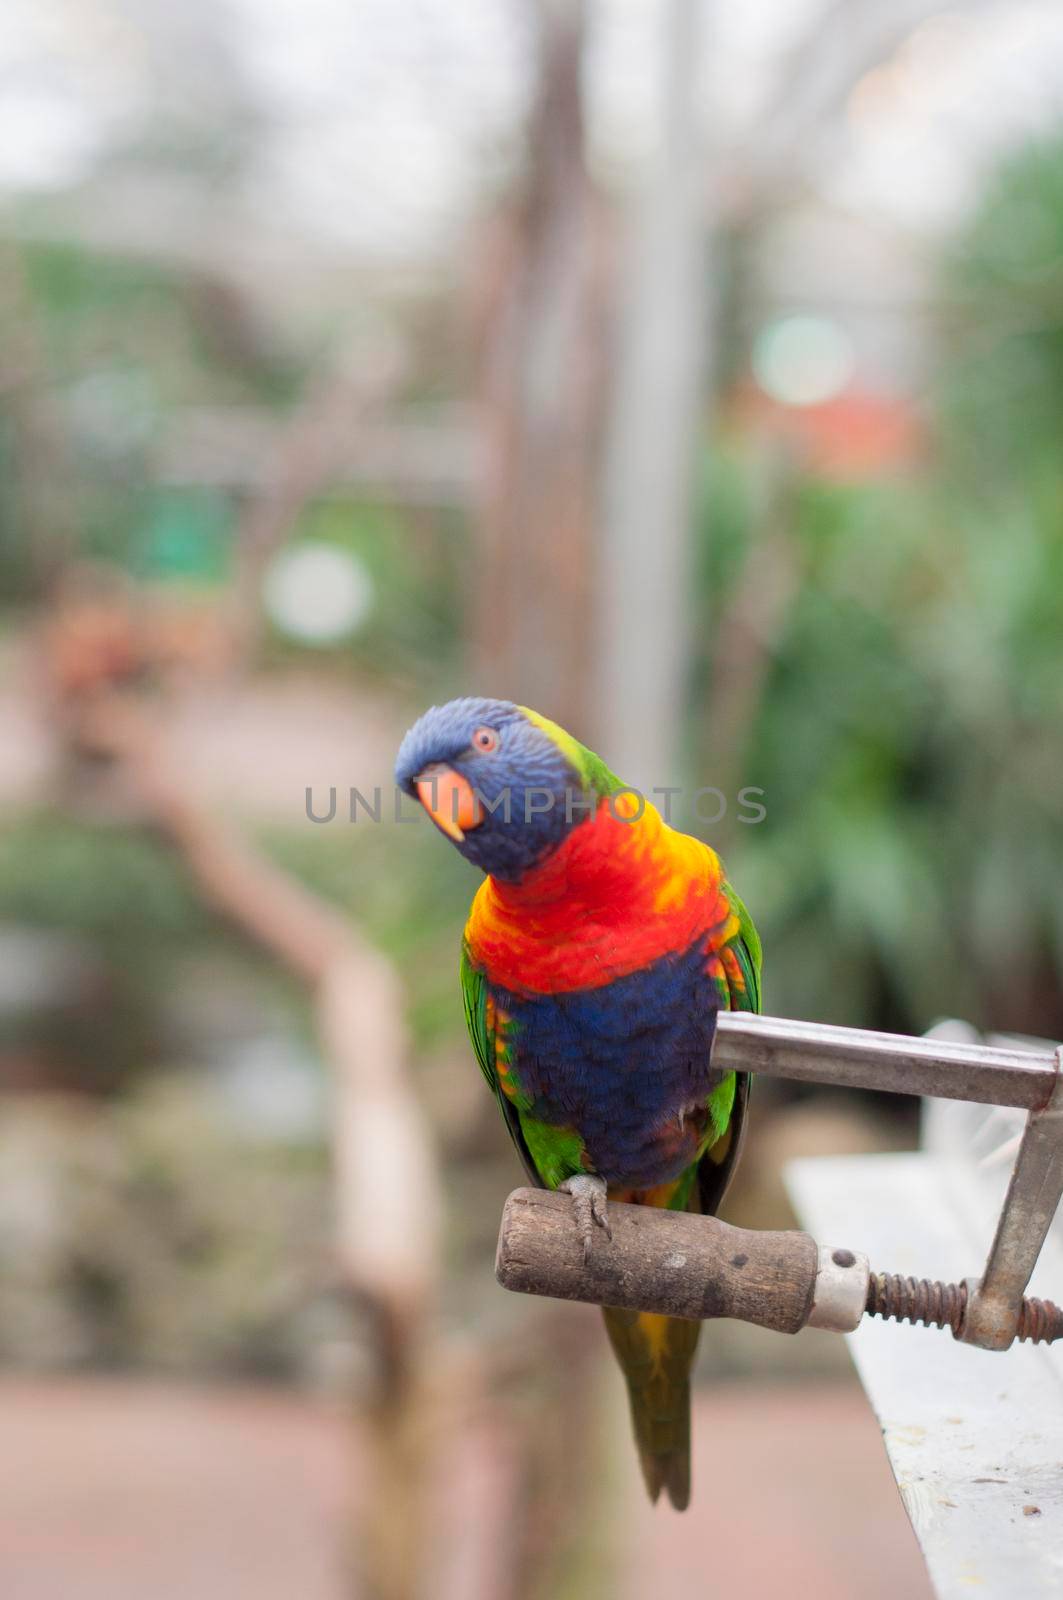 bright colorful rainbow lorikeet, cleans feathers and eats from the feeder by KaterinaDalemans